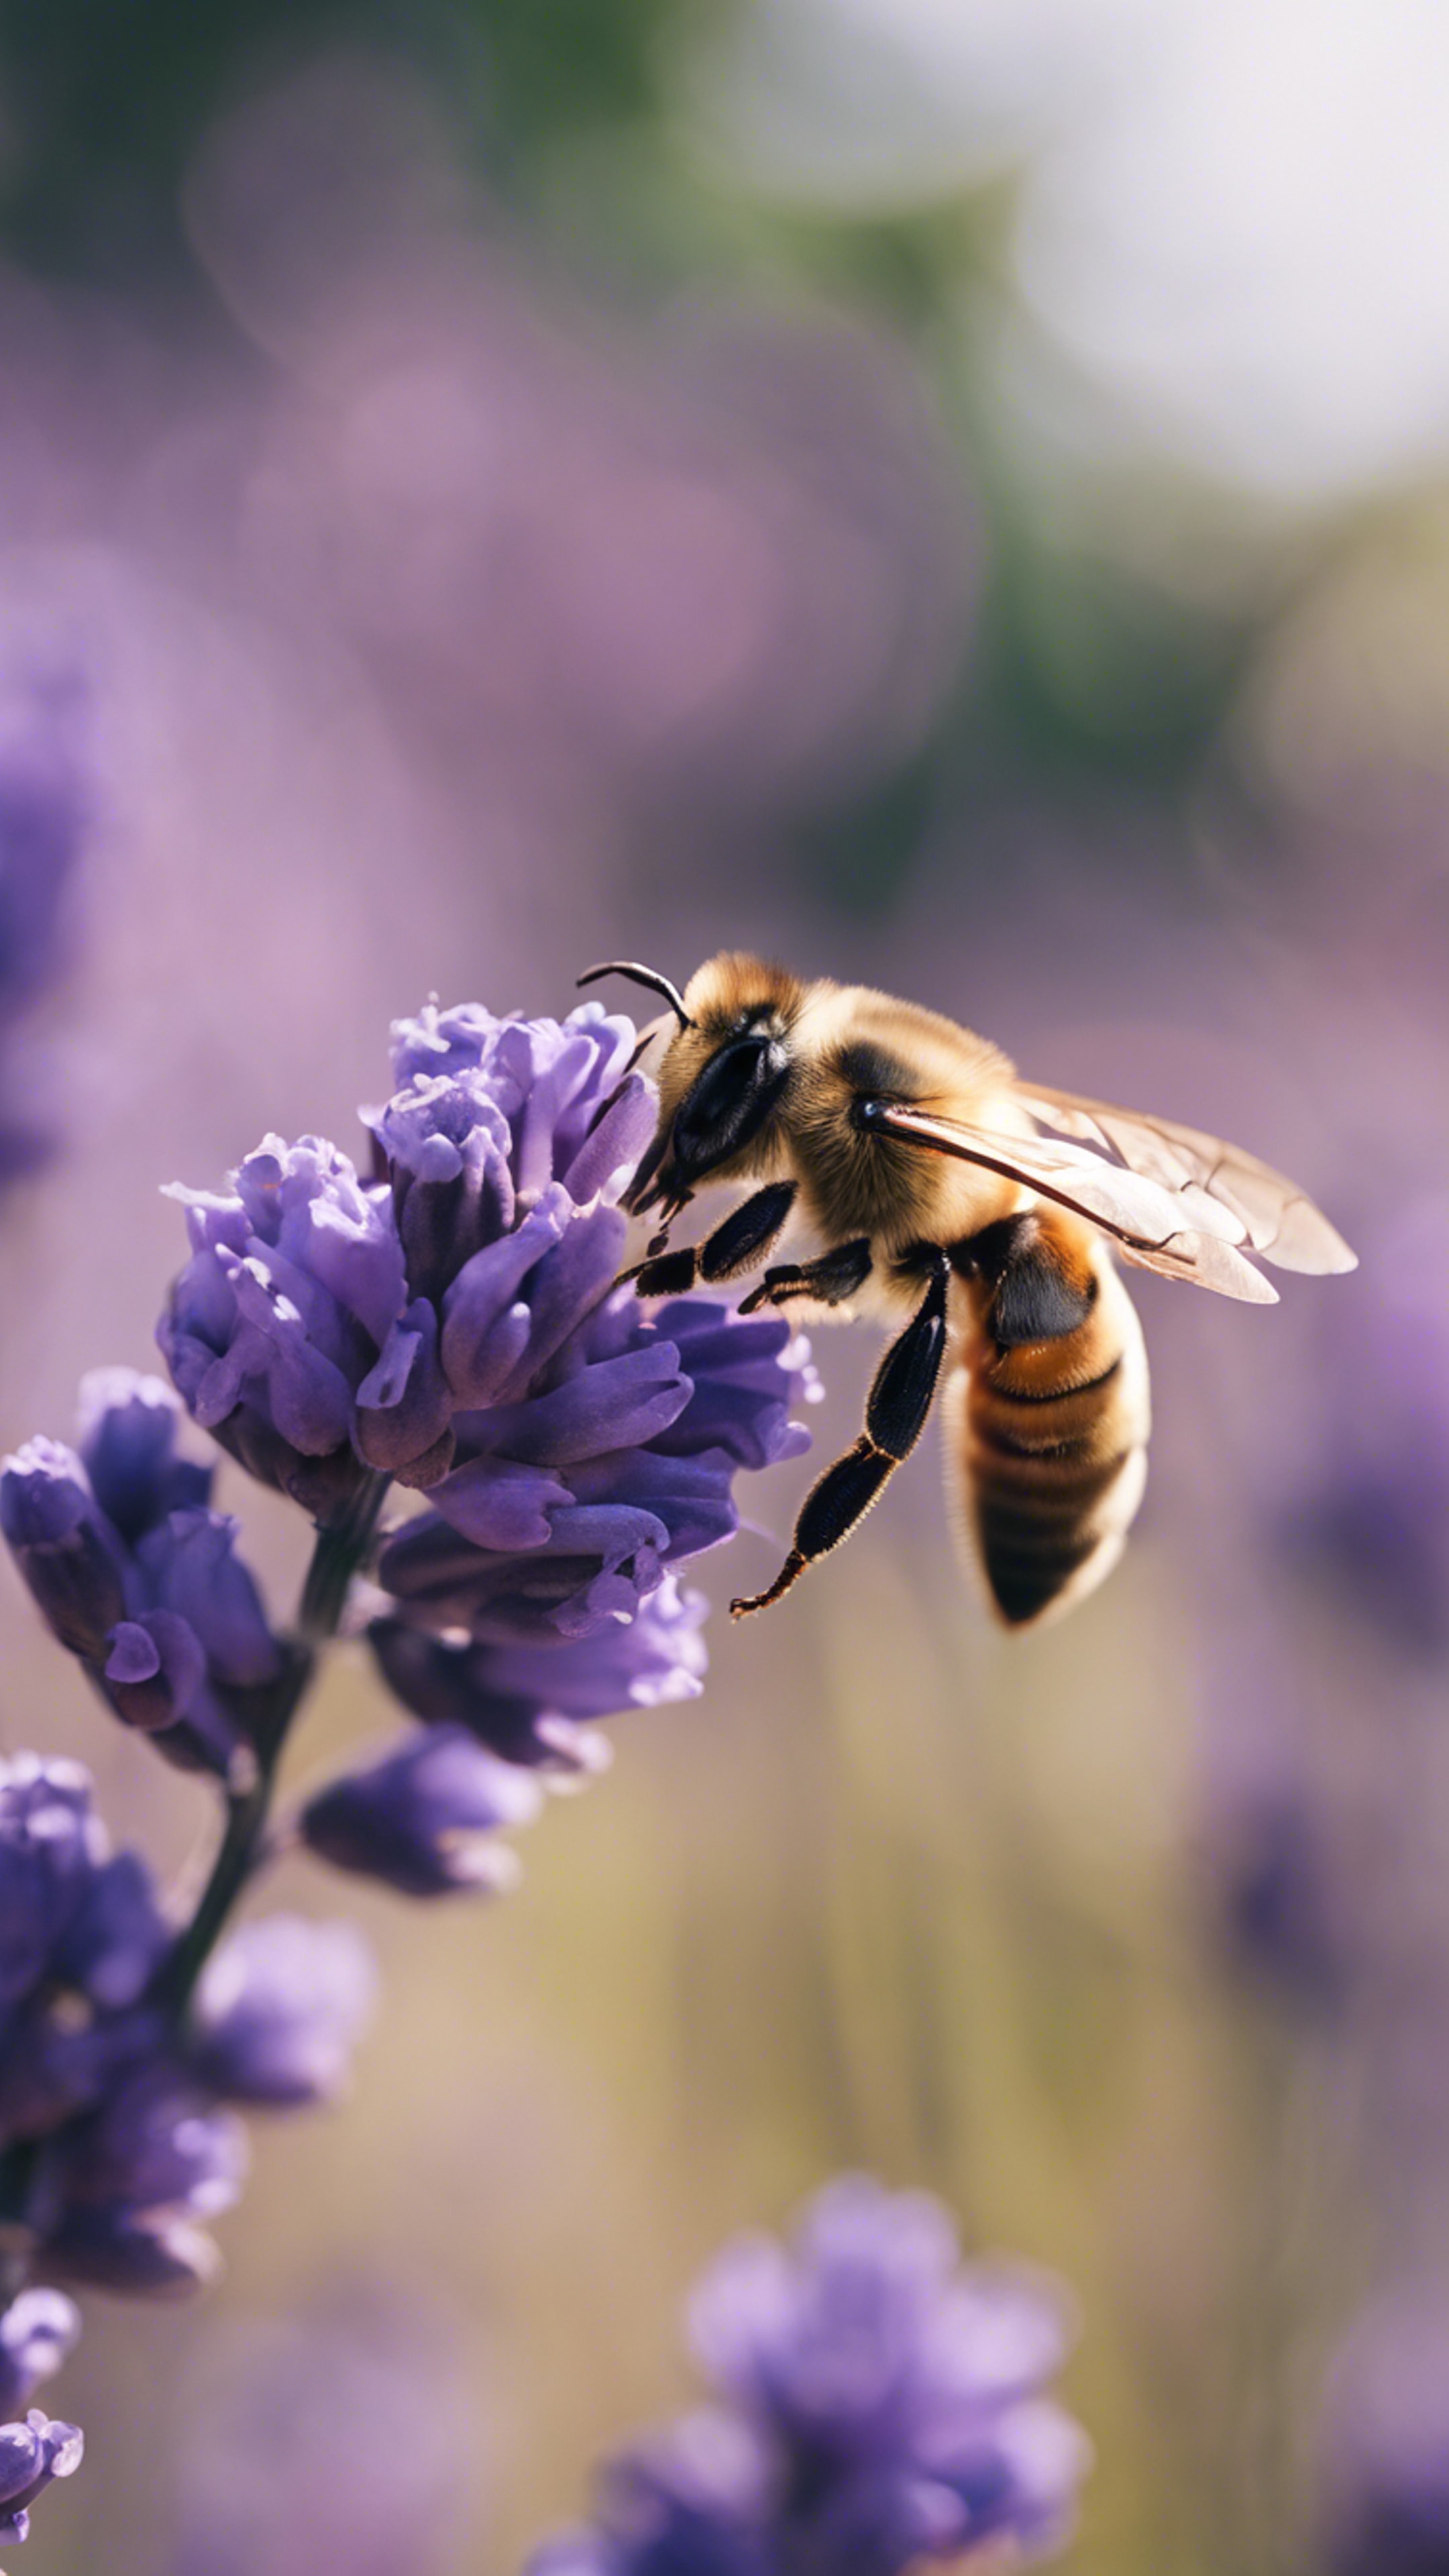 A bee busily pollenating the purple blossoms of lavender flowers.壁紙[9c61e9f9e6f24bcdbc84]